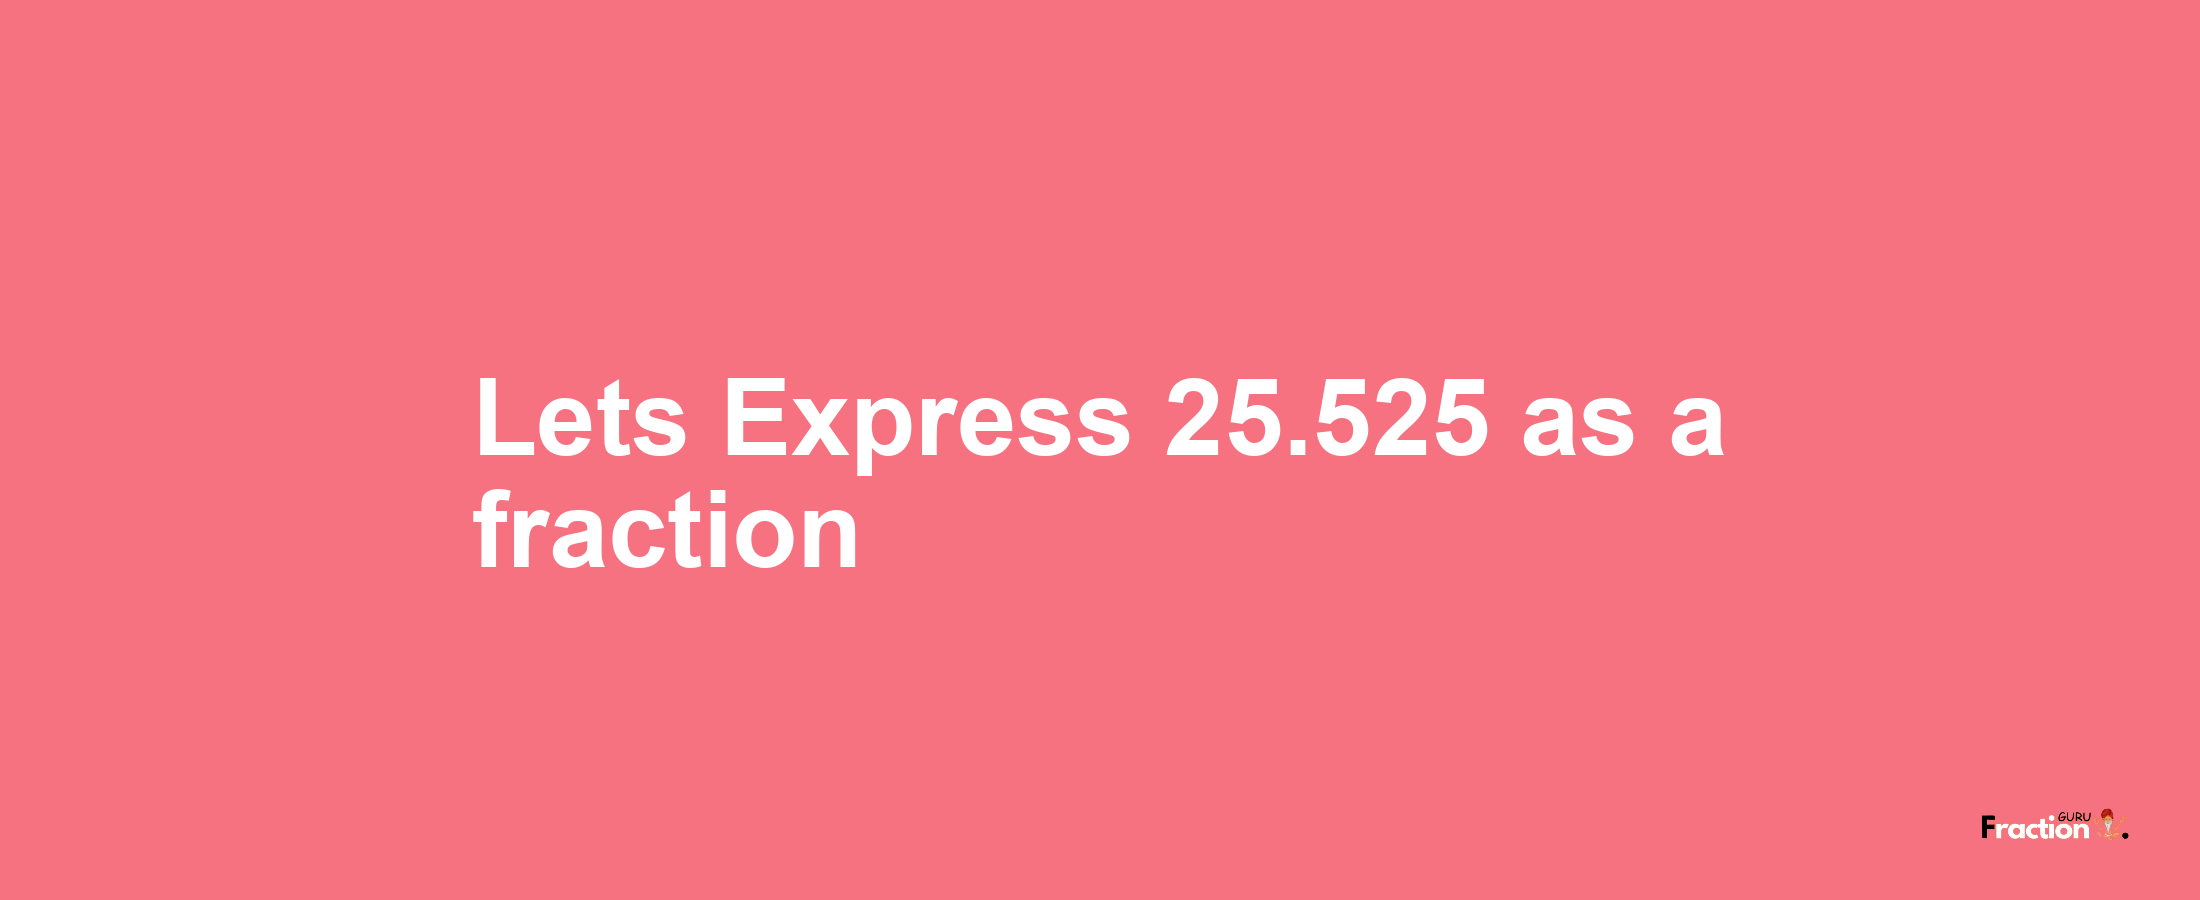 Lets Express 25.525 as afraction